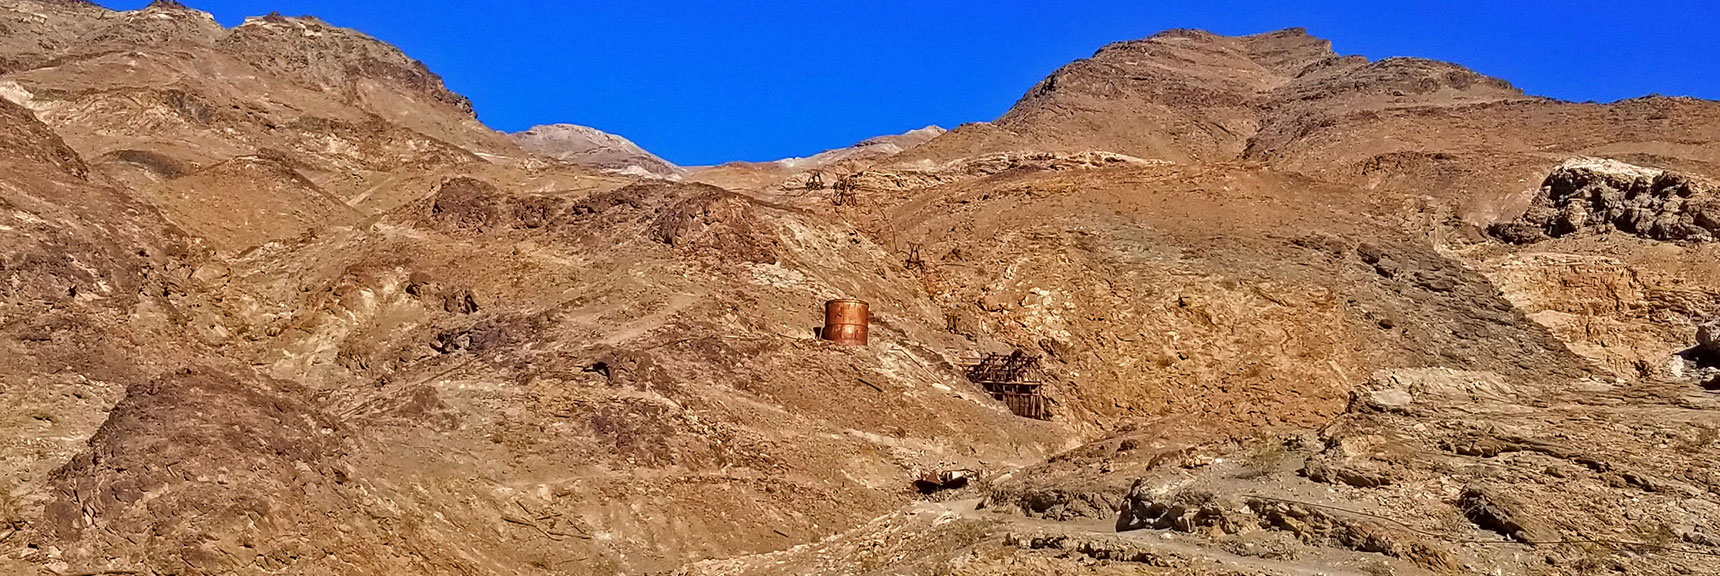 Approaching Lower Stamp Mill and Tramway in Funeral Mountains | Keane Wonder Mine | Death Valley National Park, California